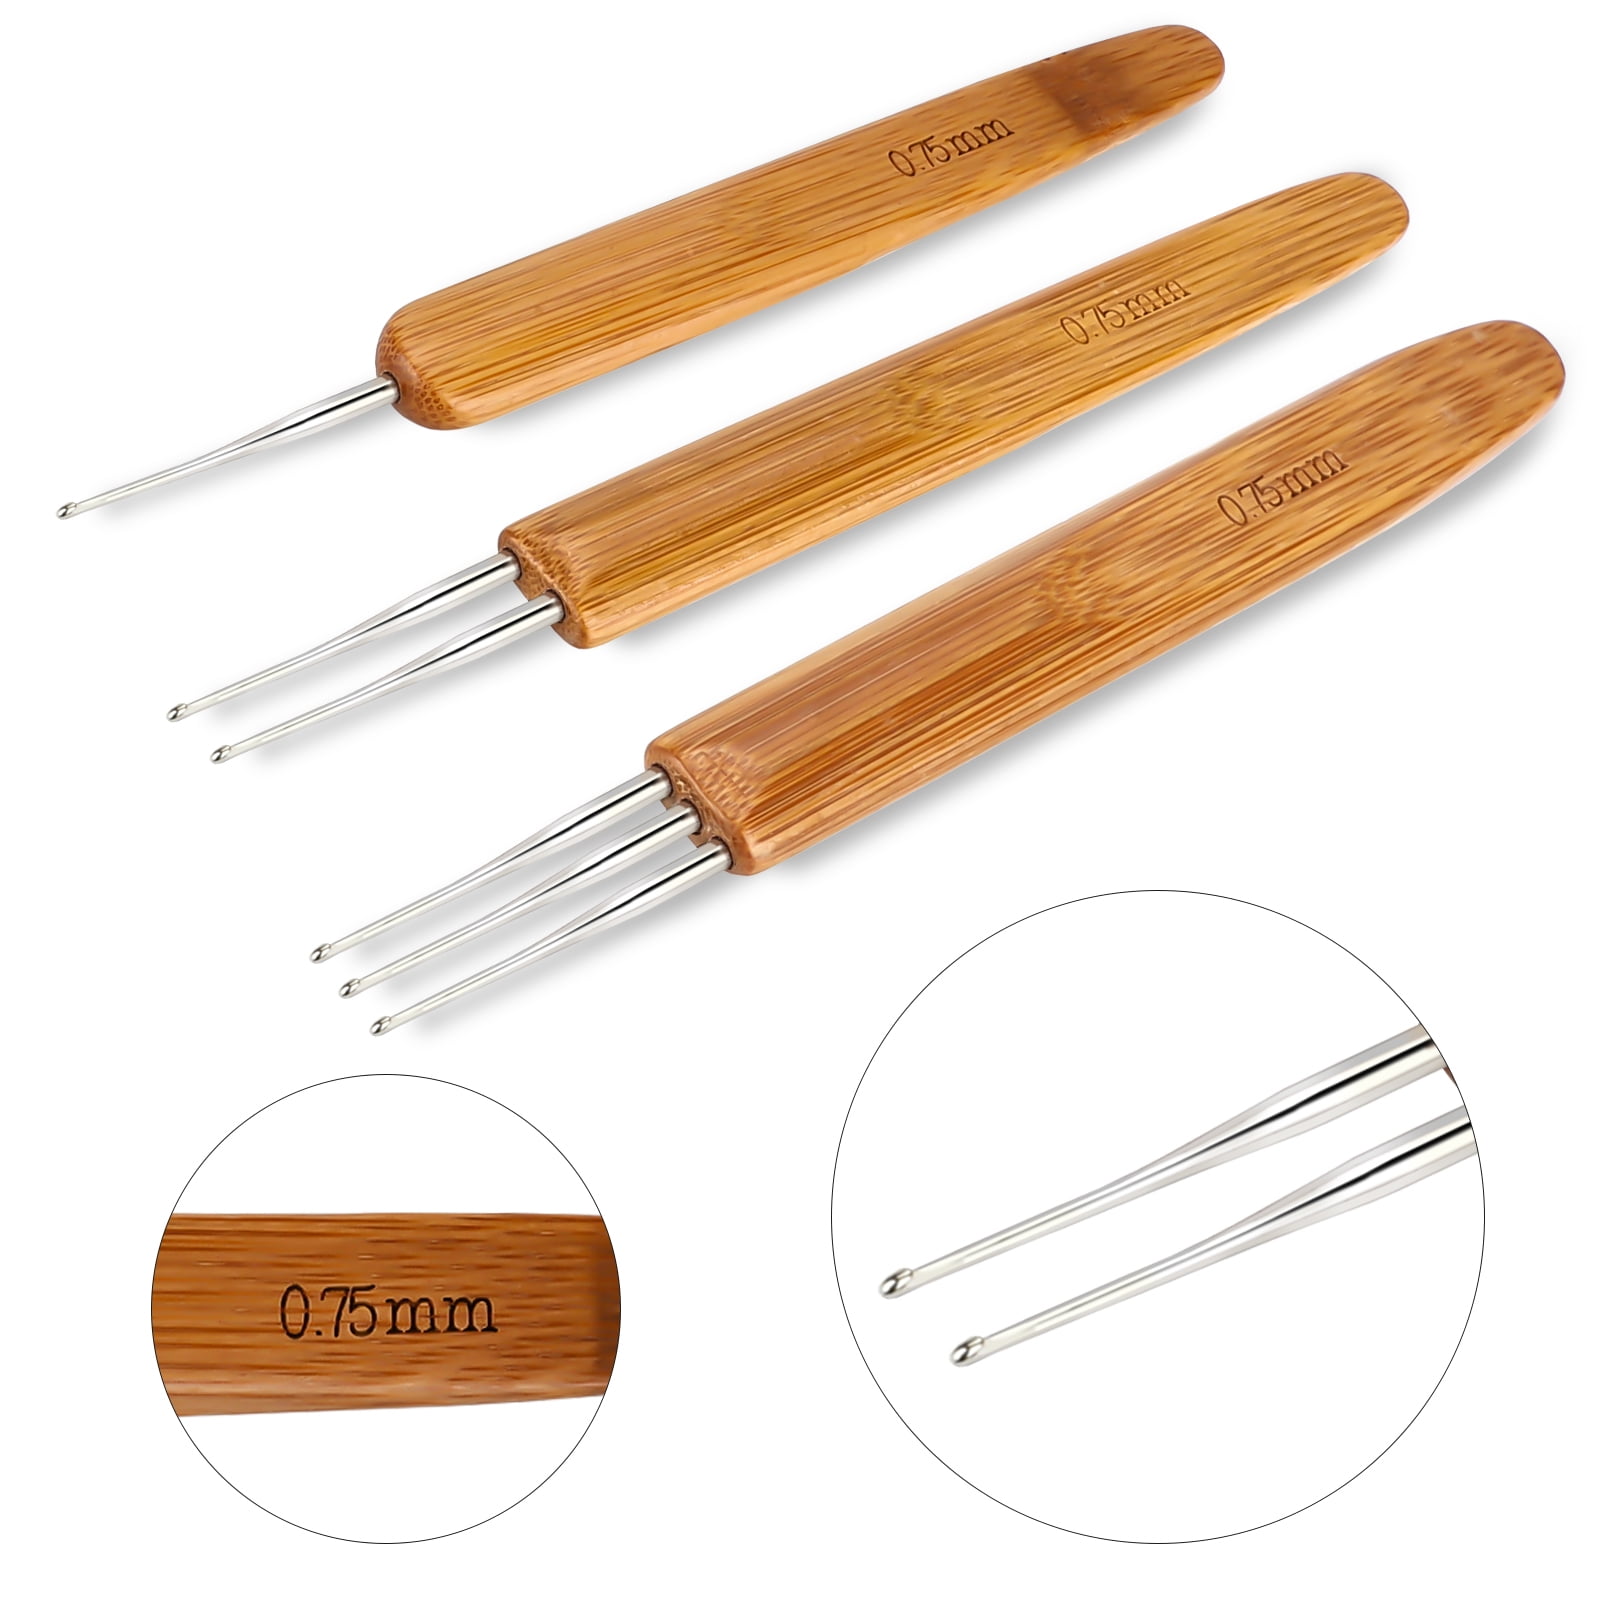 CYRONG Dreadlock Crochet Hook Tool, Stainless Steel Sturdy and Durable with  a Natural Bamboo Handle, Soft to Touch Braid Hair Dreadlocks Needle